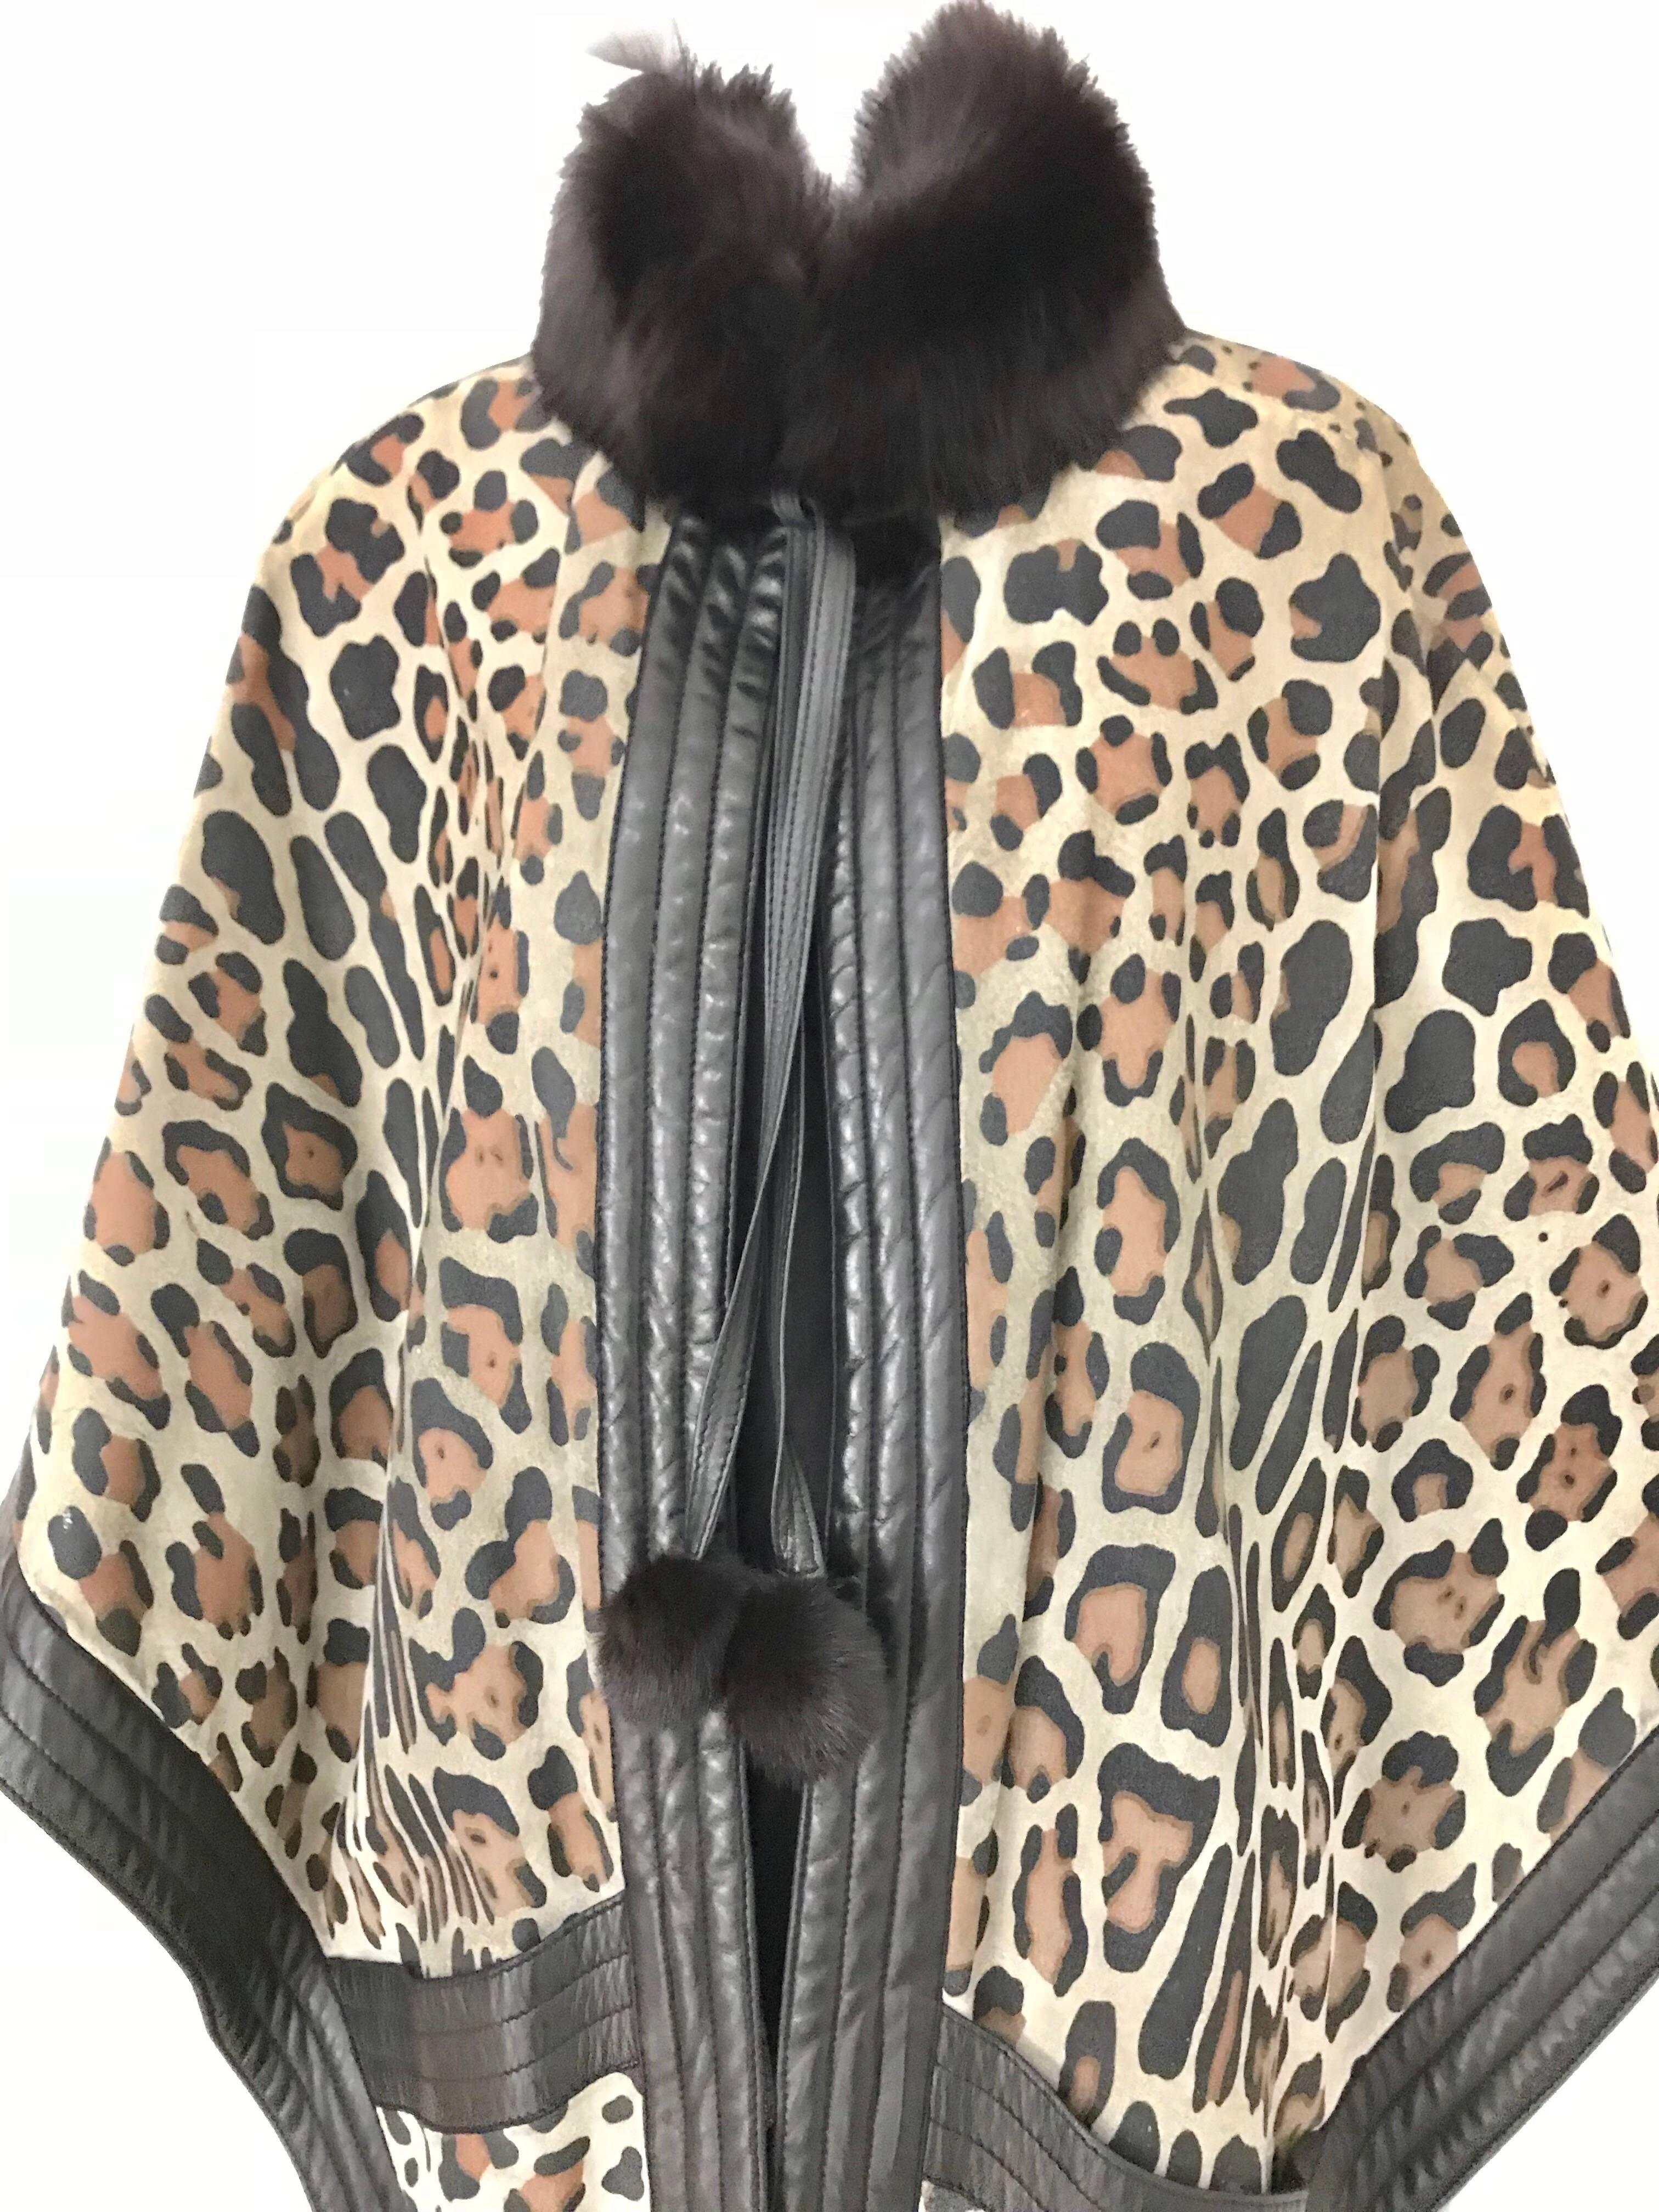 Incredible Vintage Christian Dior Suede Leopard Print Cape lined in wool with fox fur collar and leather tassel. Cape has 2 front pockets and 2 inner pockets.  
Fit all Size.  Small to LARGE  /Mannequin is size 2 ( XS)
